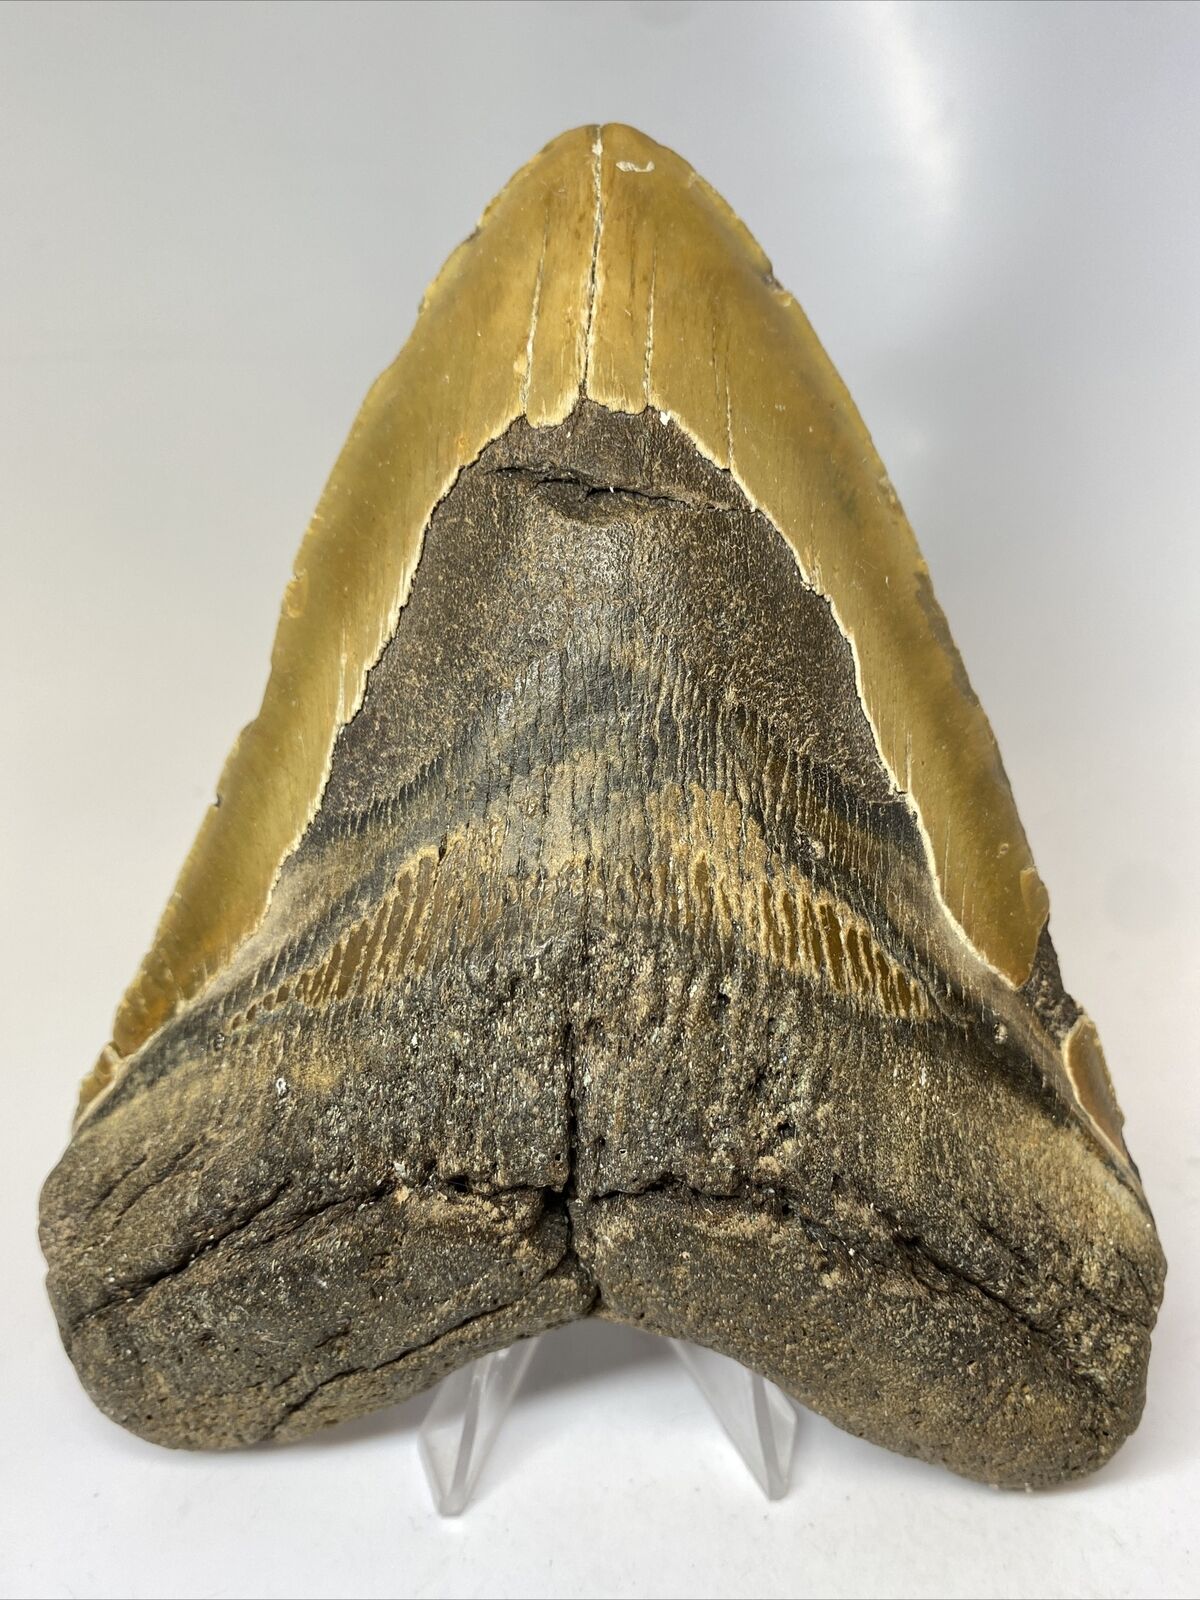 Megalodon Shark Tooth 6.39” Massive - Authentic - Beautiful Fossil 8059